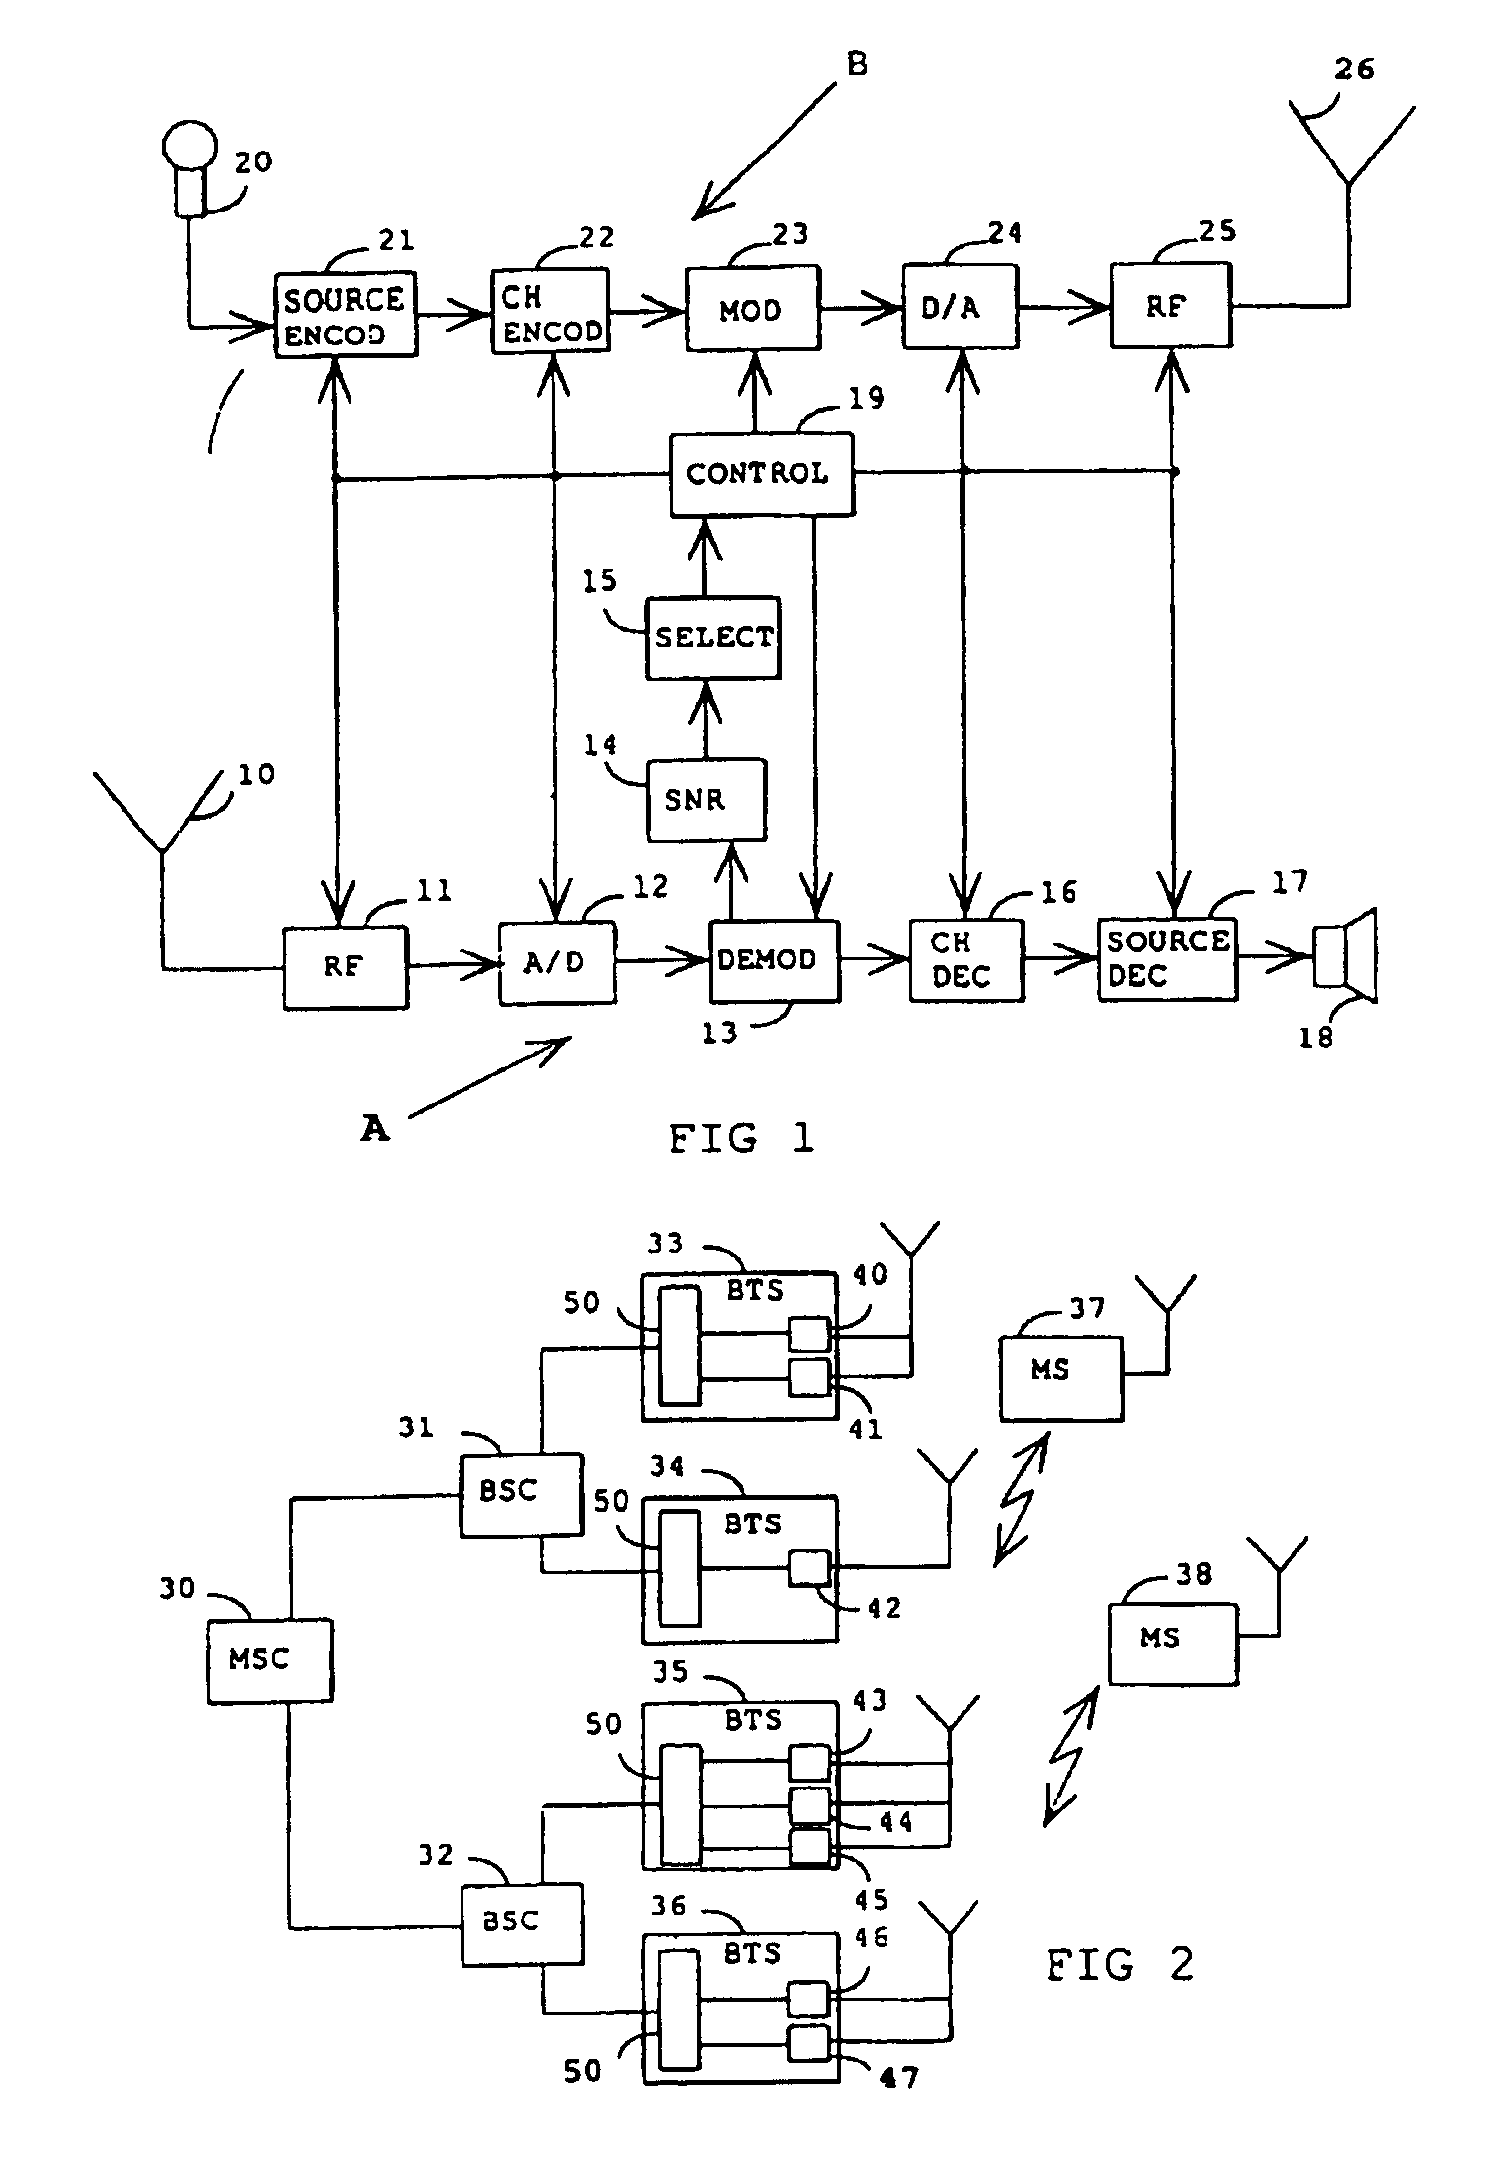 Establishment of a connection between a base station and a mobile station using random access channels